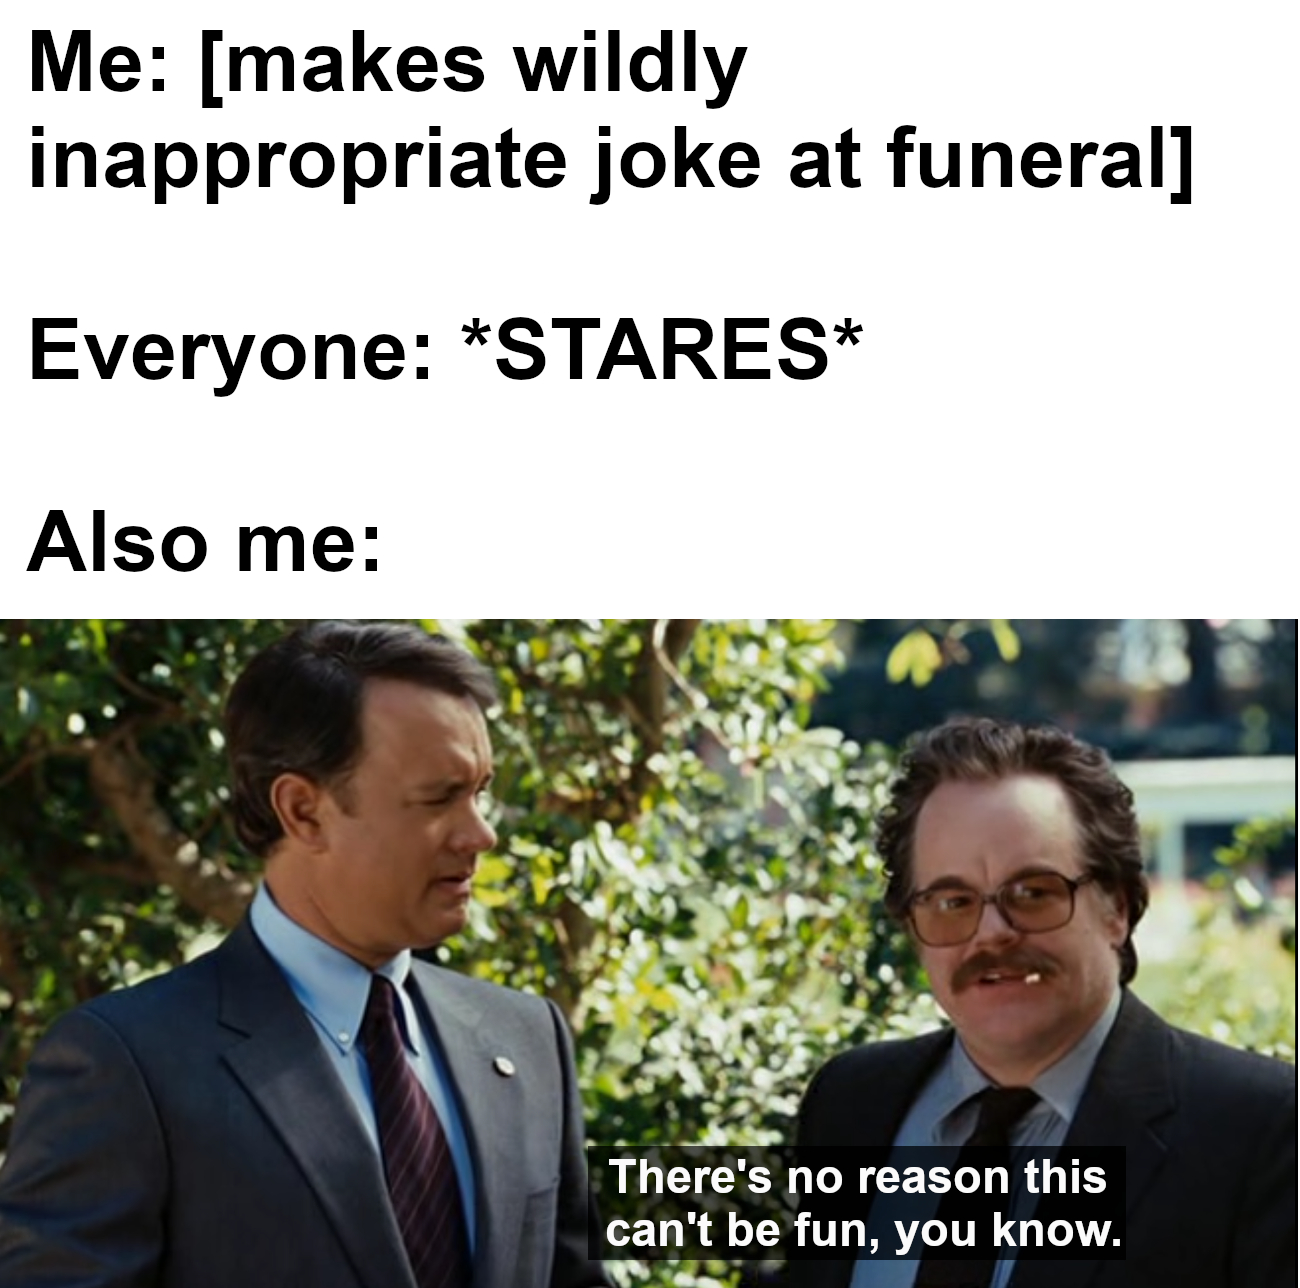 inappropriate memes - windows 2000 - Me makes wildly inappropriate joke at funeral Everyone Stares Also me There's no reason this can't be fun, you know.